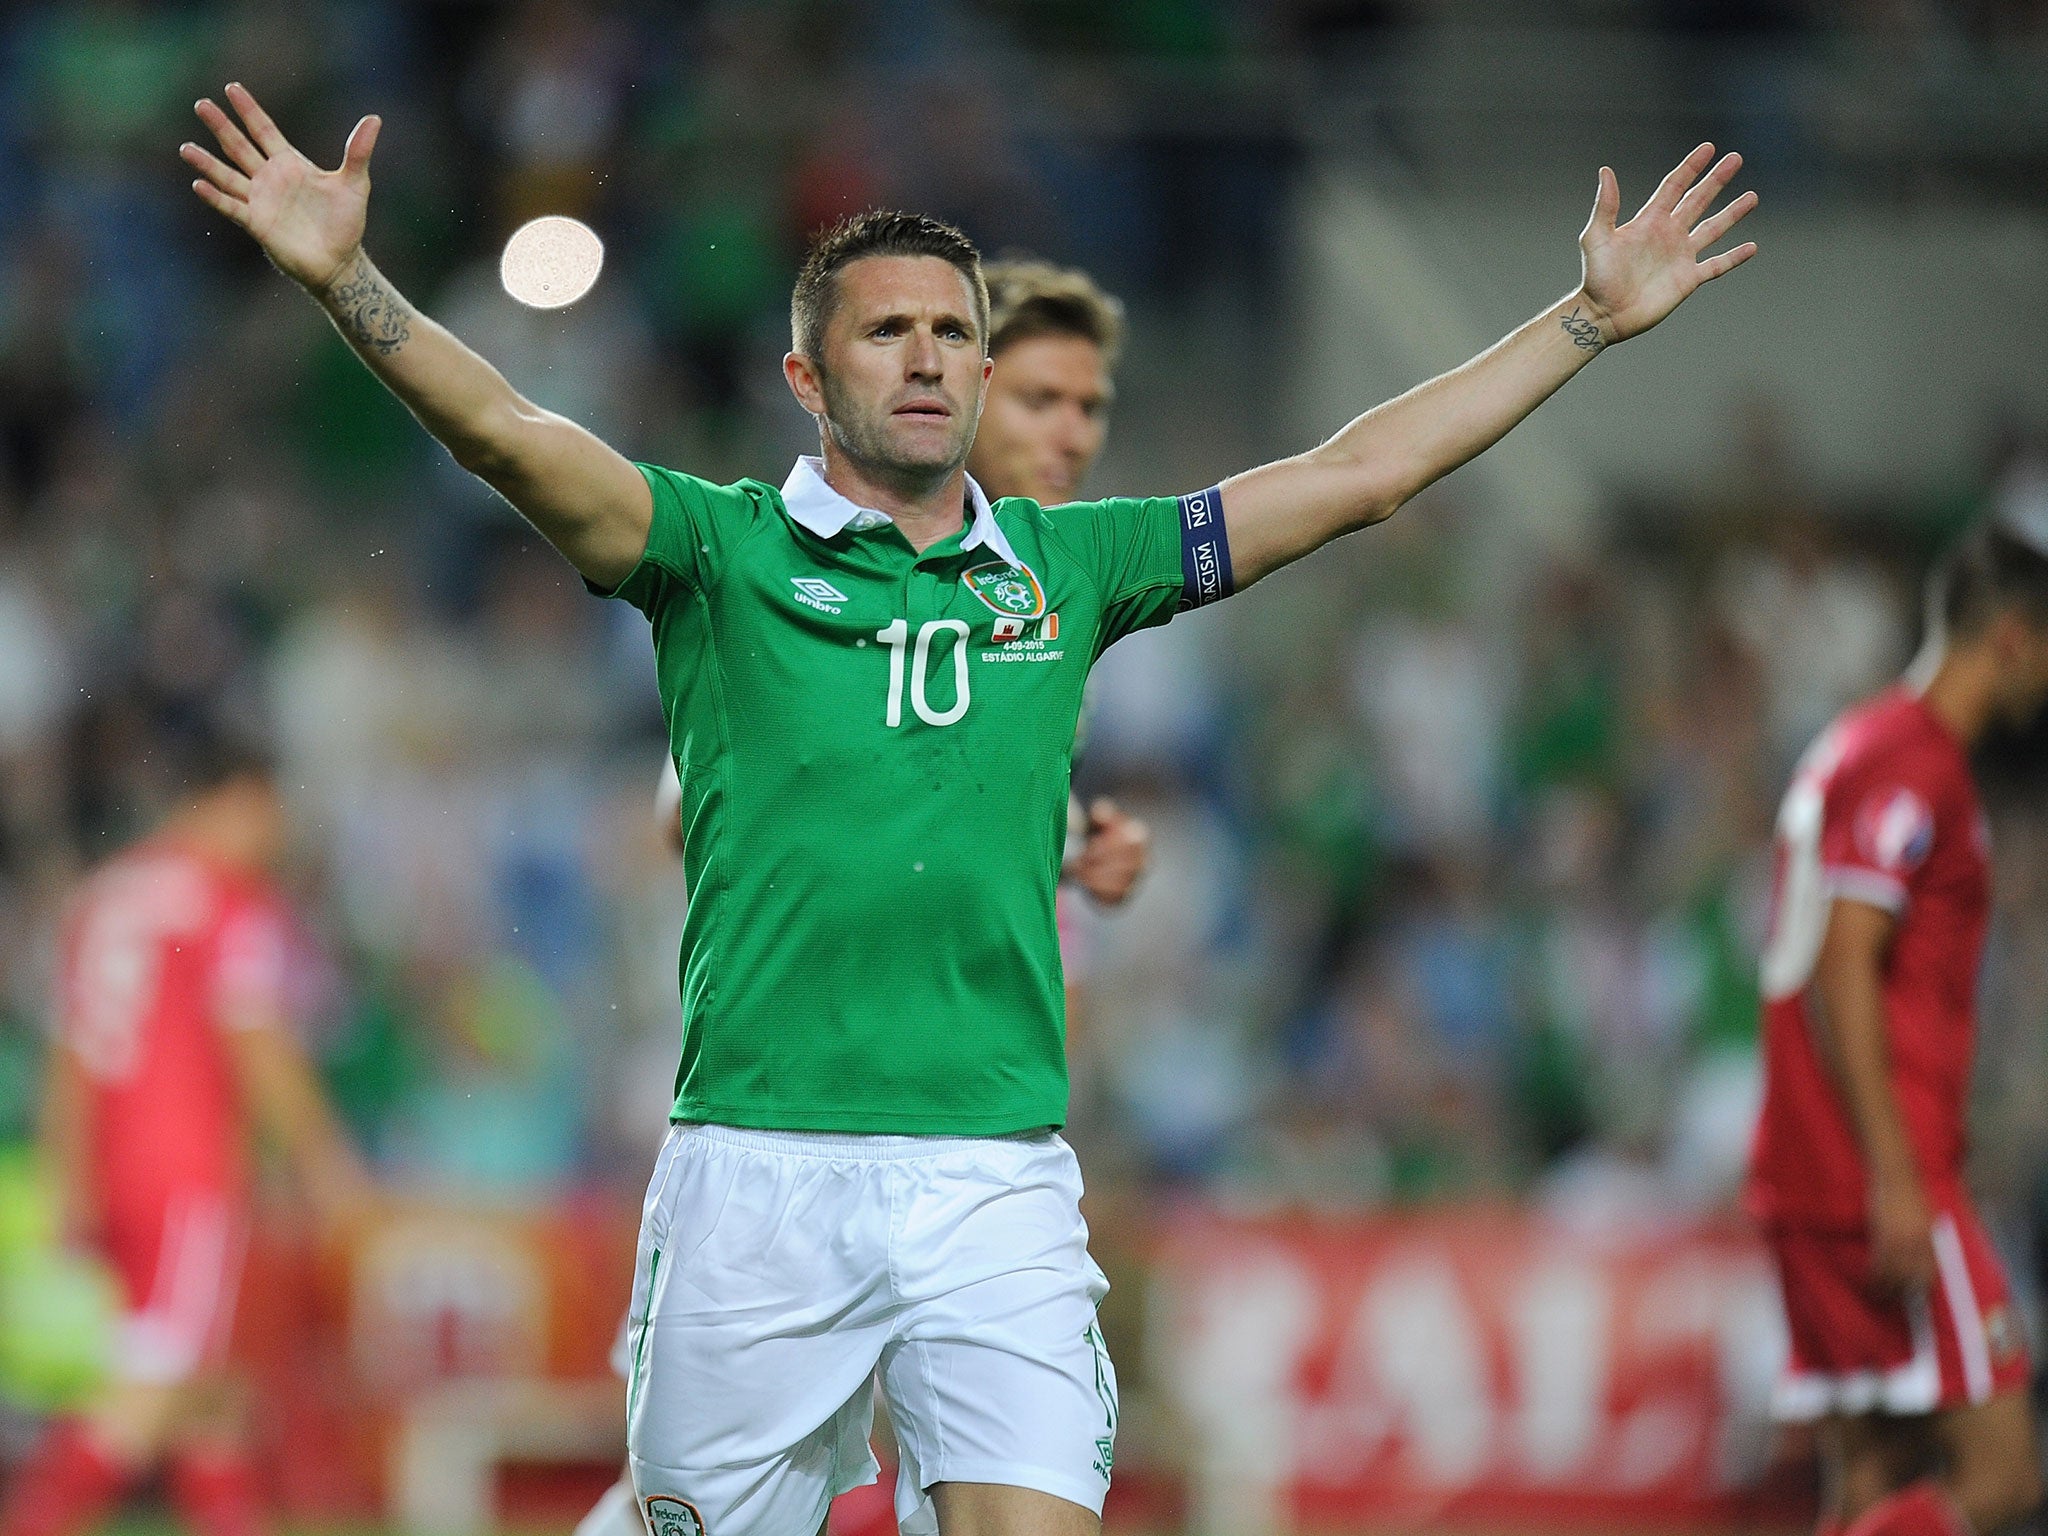 Robbie Keane still has a chance of making the Euro 2016 squad